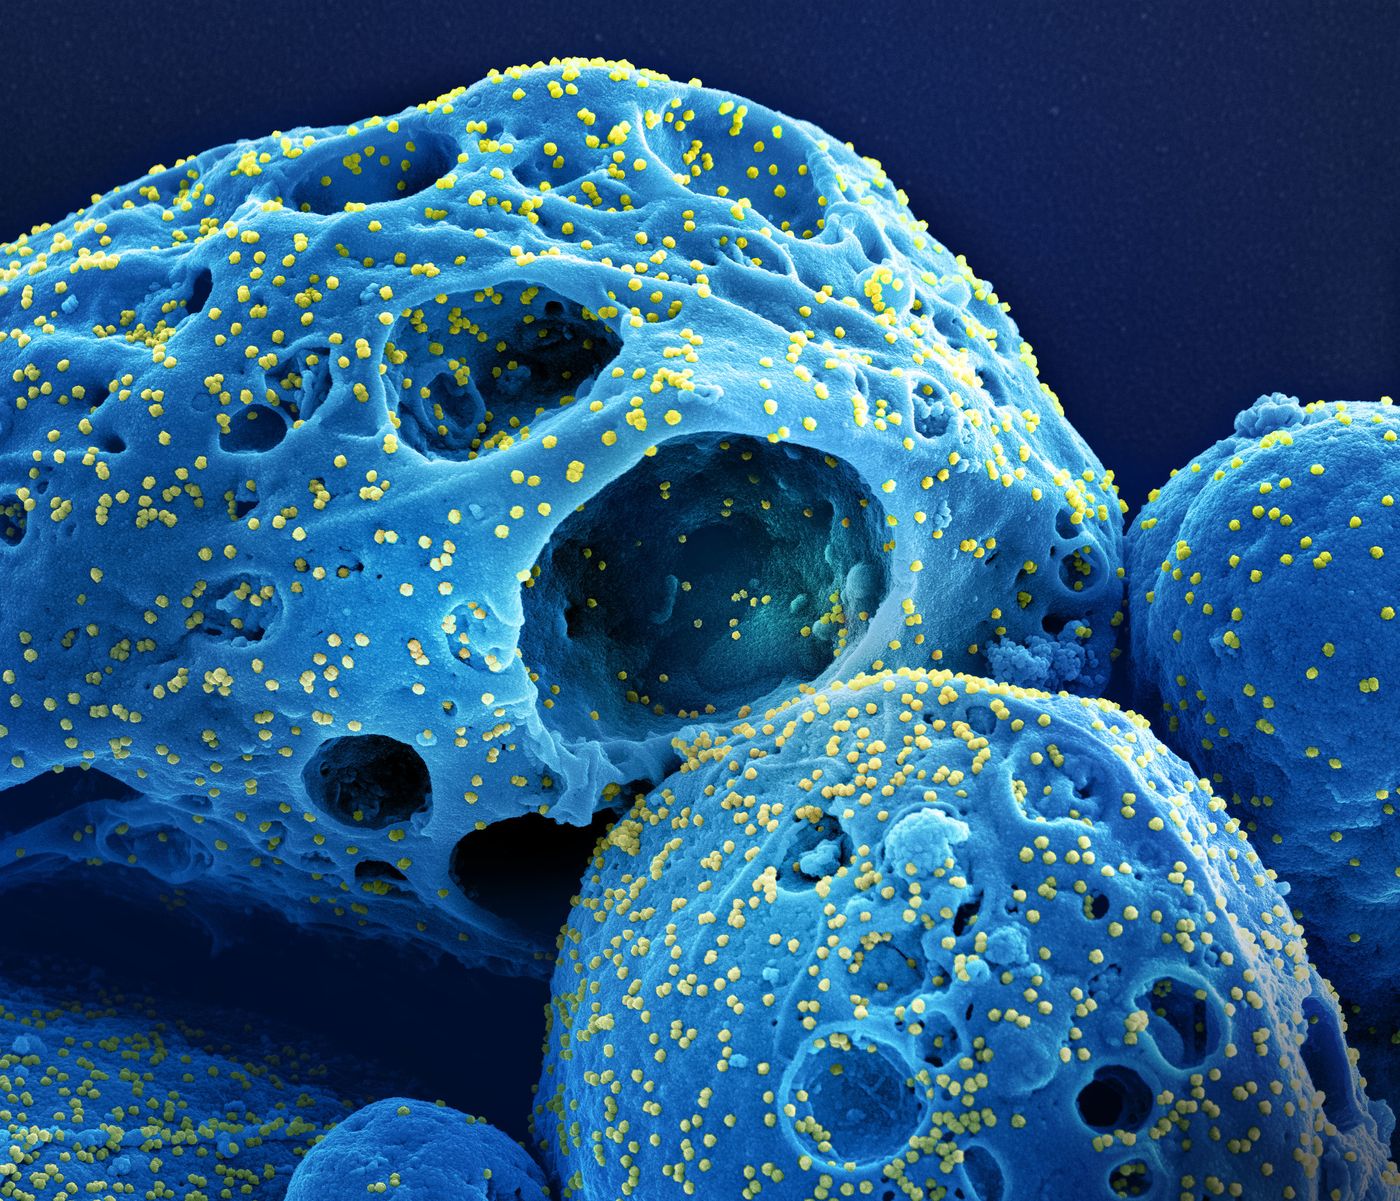 Colorized scanning electron micrograph of a cell (blue) infected with the Omicron strain of SARS-CoV-2 virus particles (yellow), isolated from a patient sample. Image captured at the NIAID Integrated Research Facility (IRF) in Fort Detrick, Maryland. Credit: NIAID